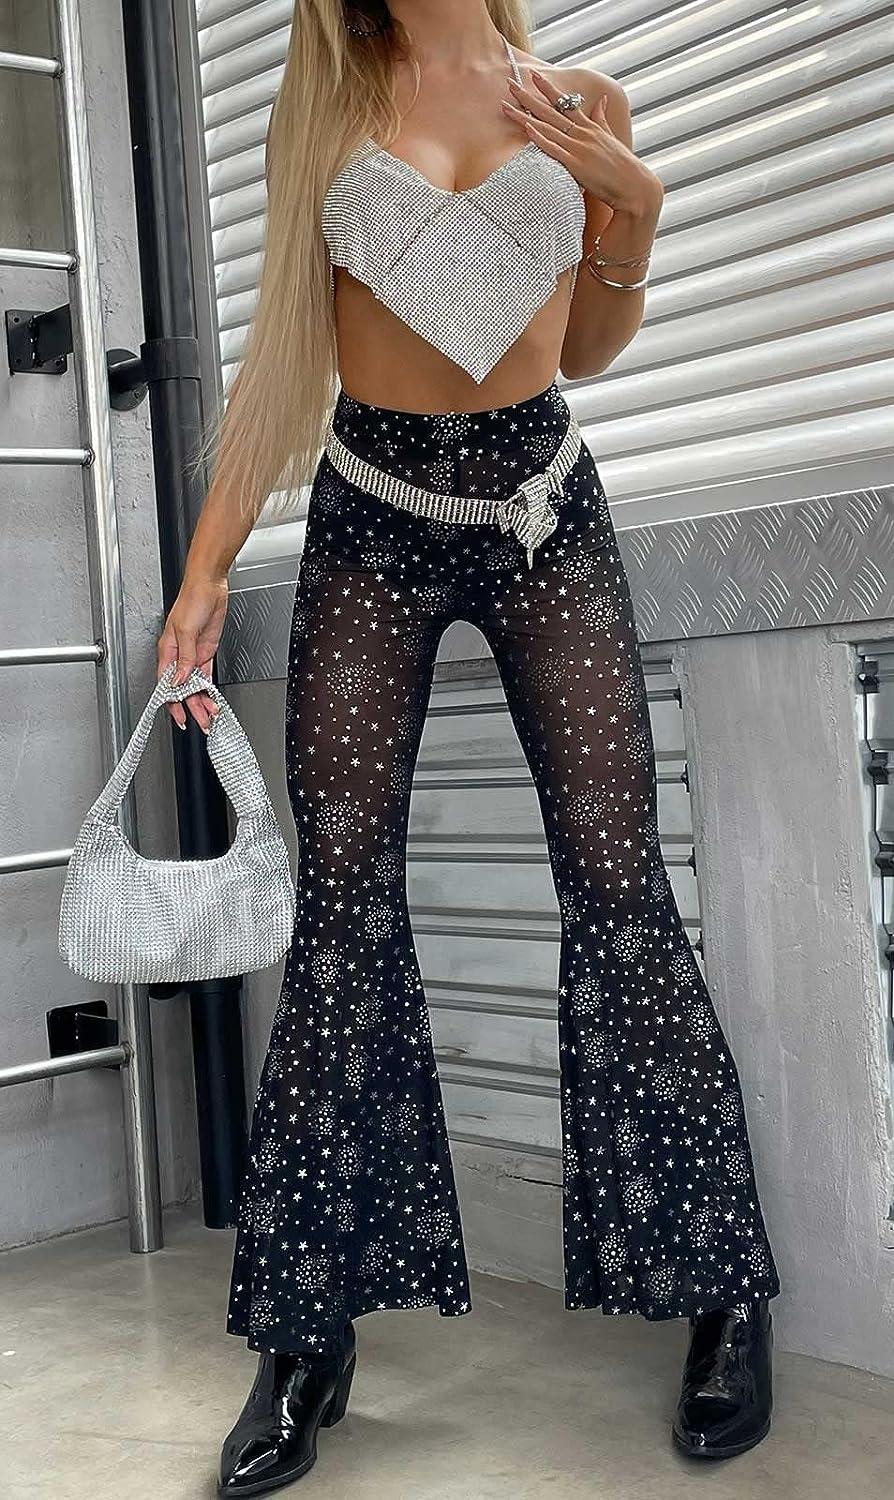 Black Rhinestone Festival Flares, Rhinestone Flares, Festival Outfit, Rave  Outfit , Mesh Trousers, Womens Trousers, Black Trousers 